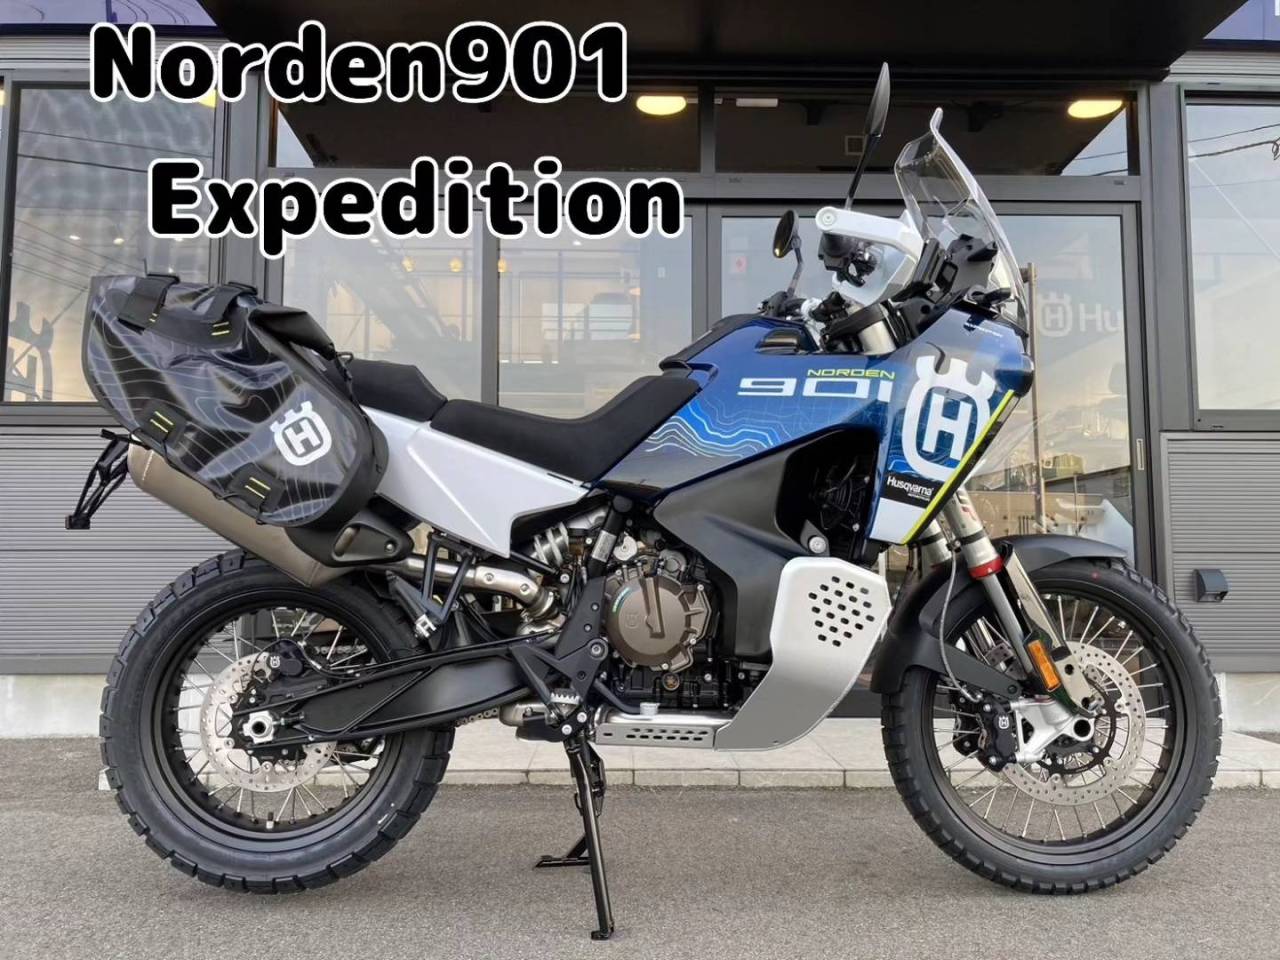 Norden901Expedition 入荷！ハスクバーナモーターサイクルズ 山形